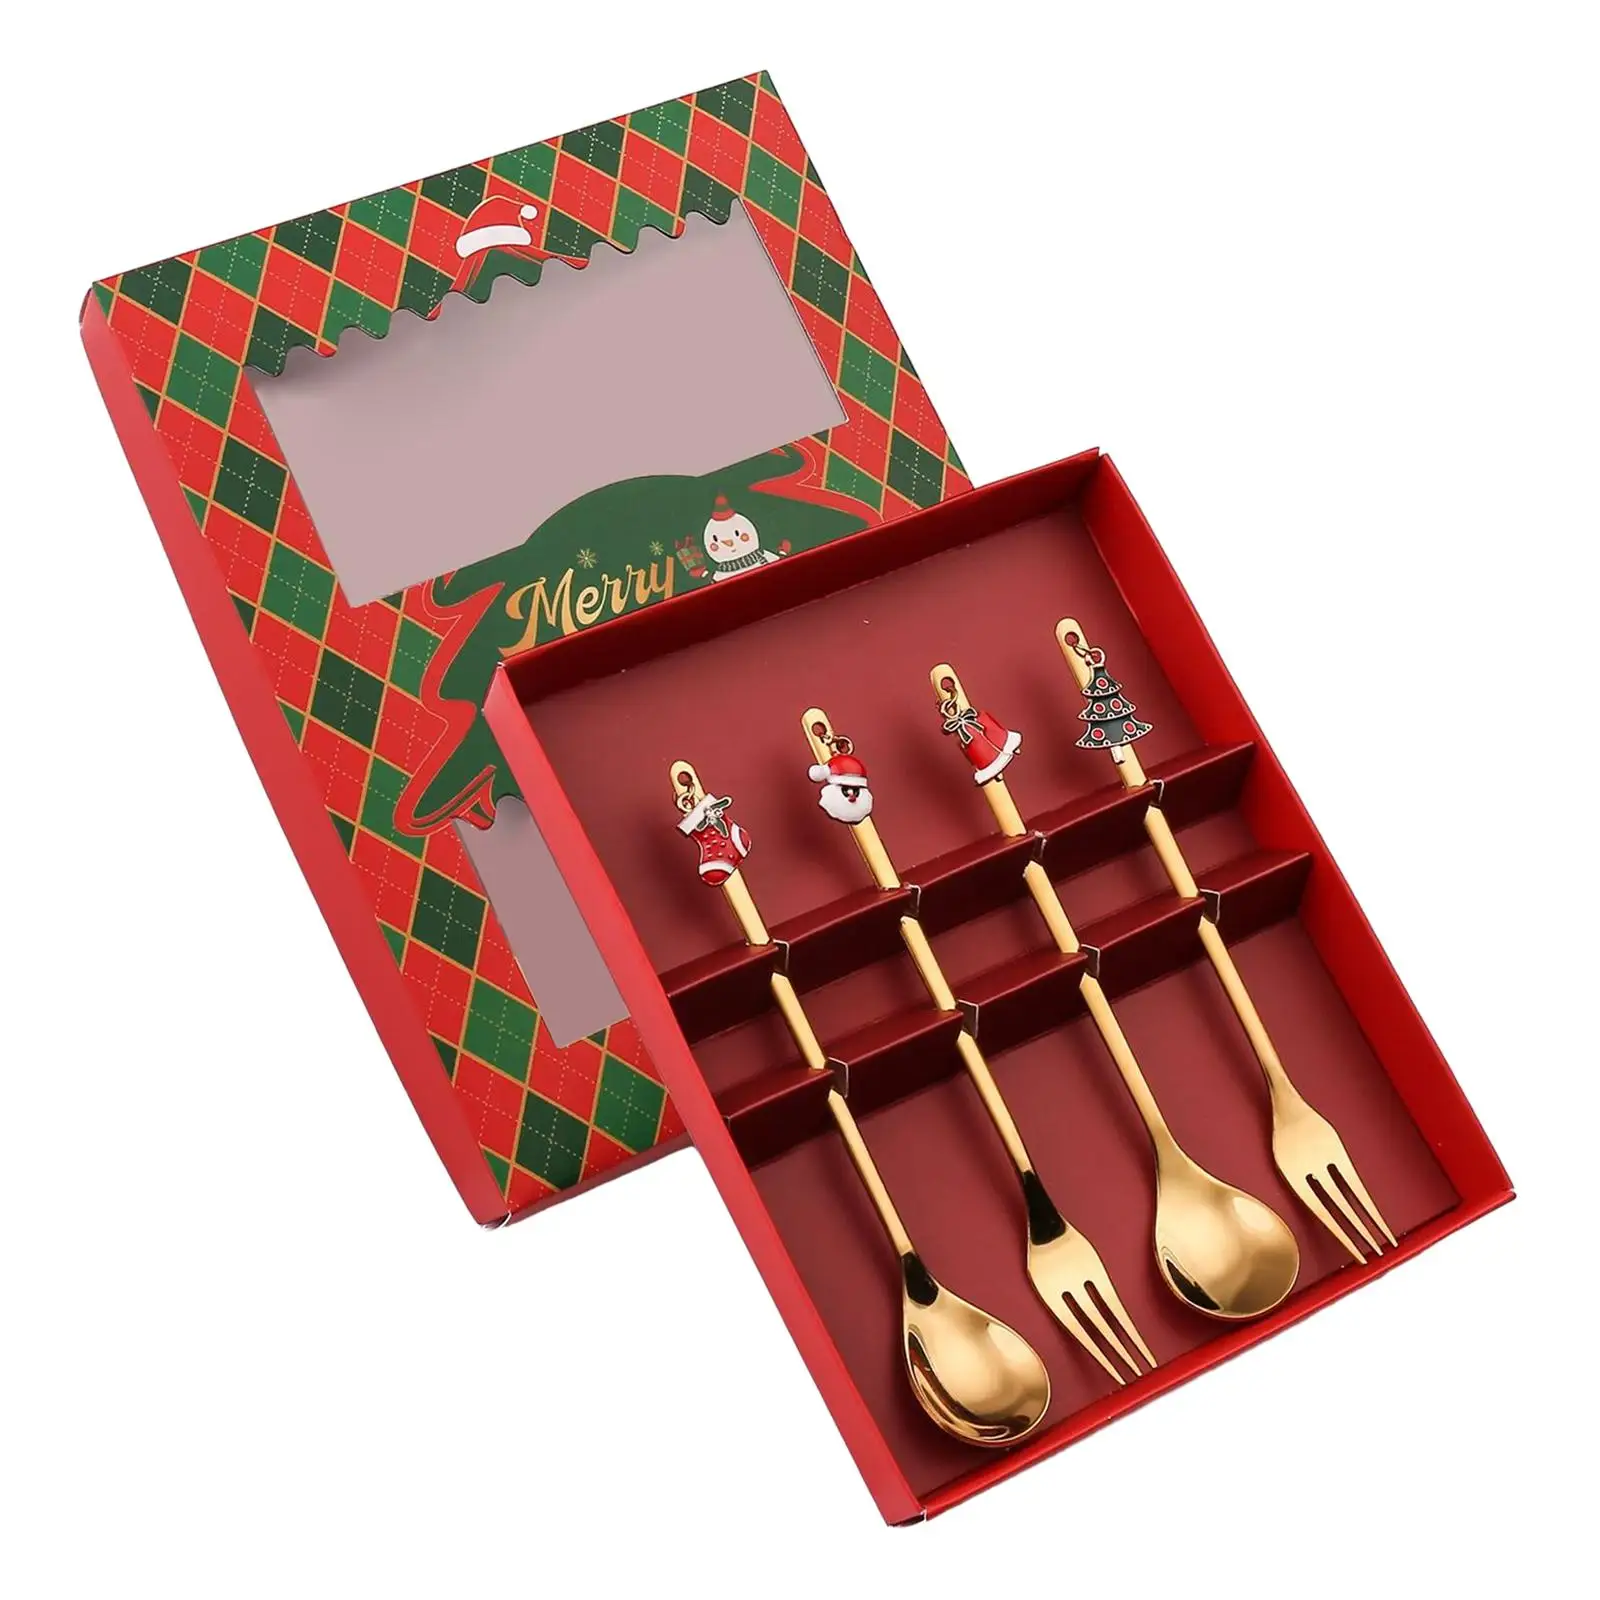 Xmas Cutlery Kits Stainless Steel Spoon Fork for Kitchen Holiday Restaurant